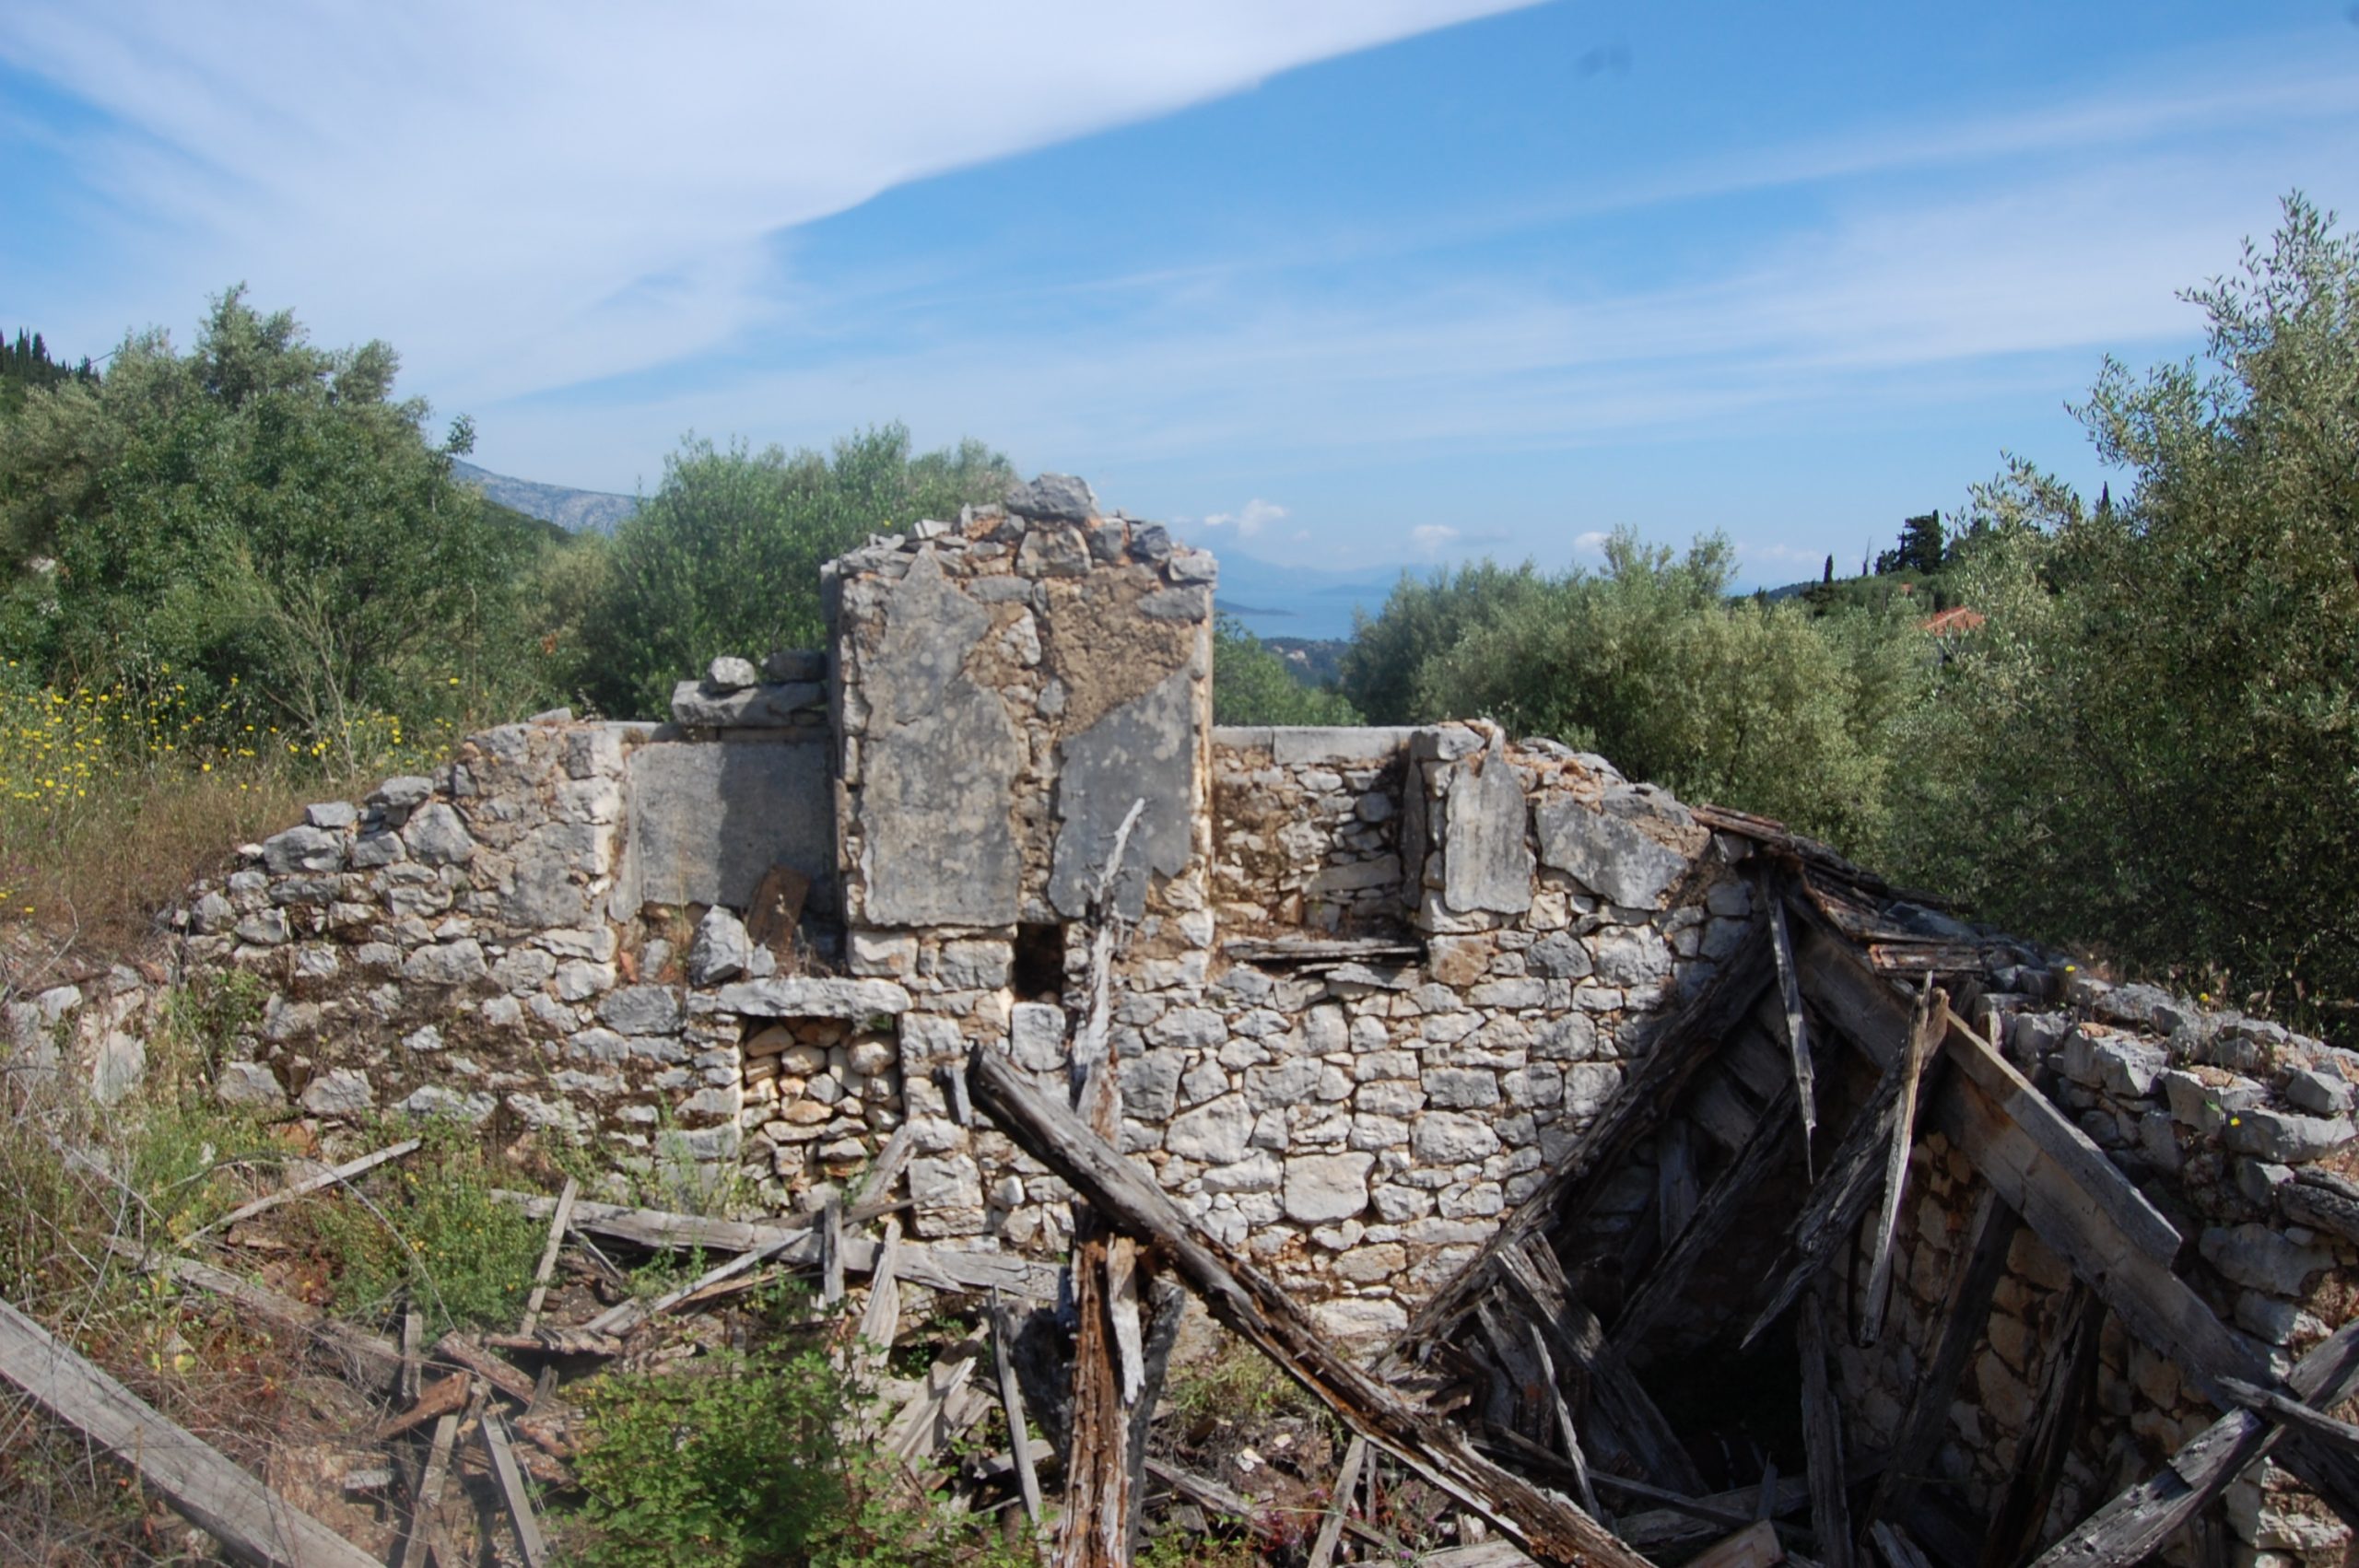 Exterior view of land with house for sale Ithaca Greece